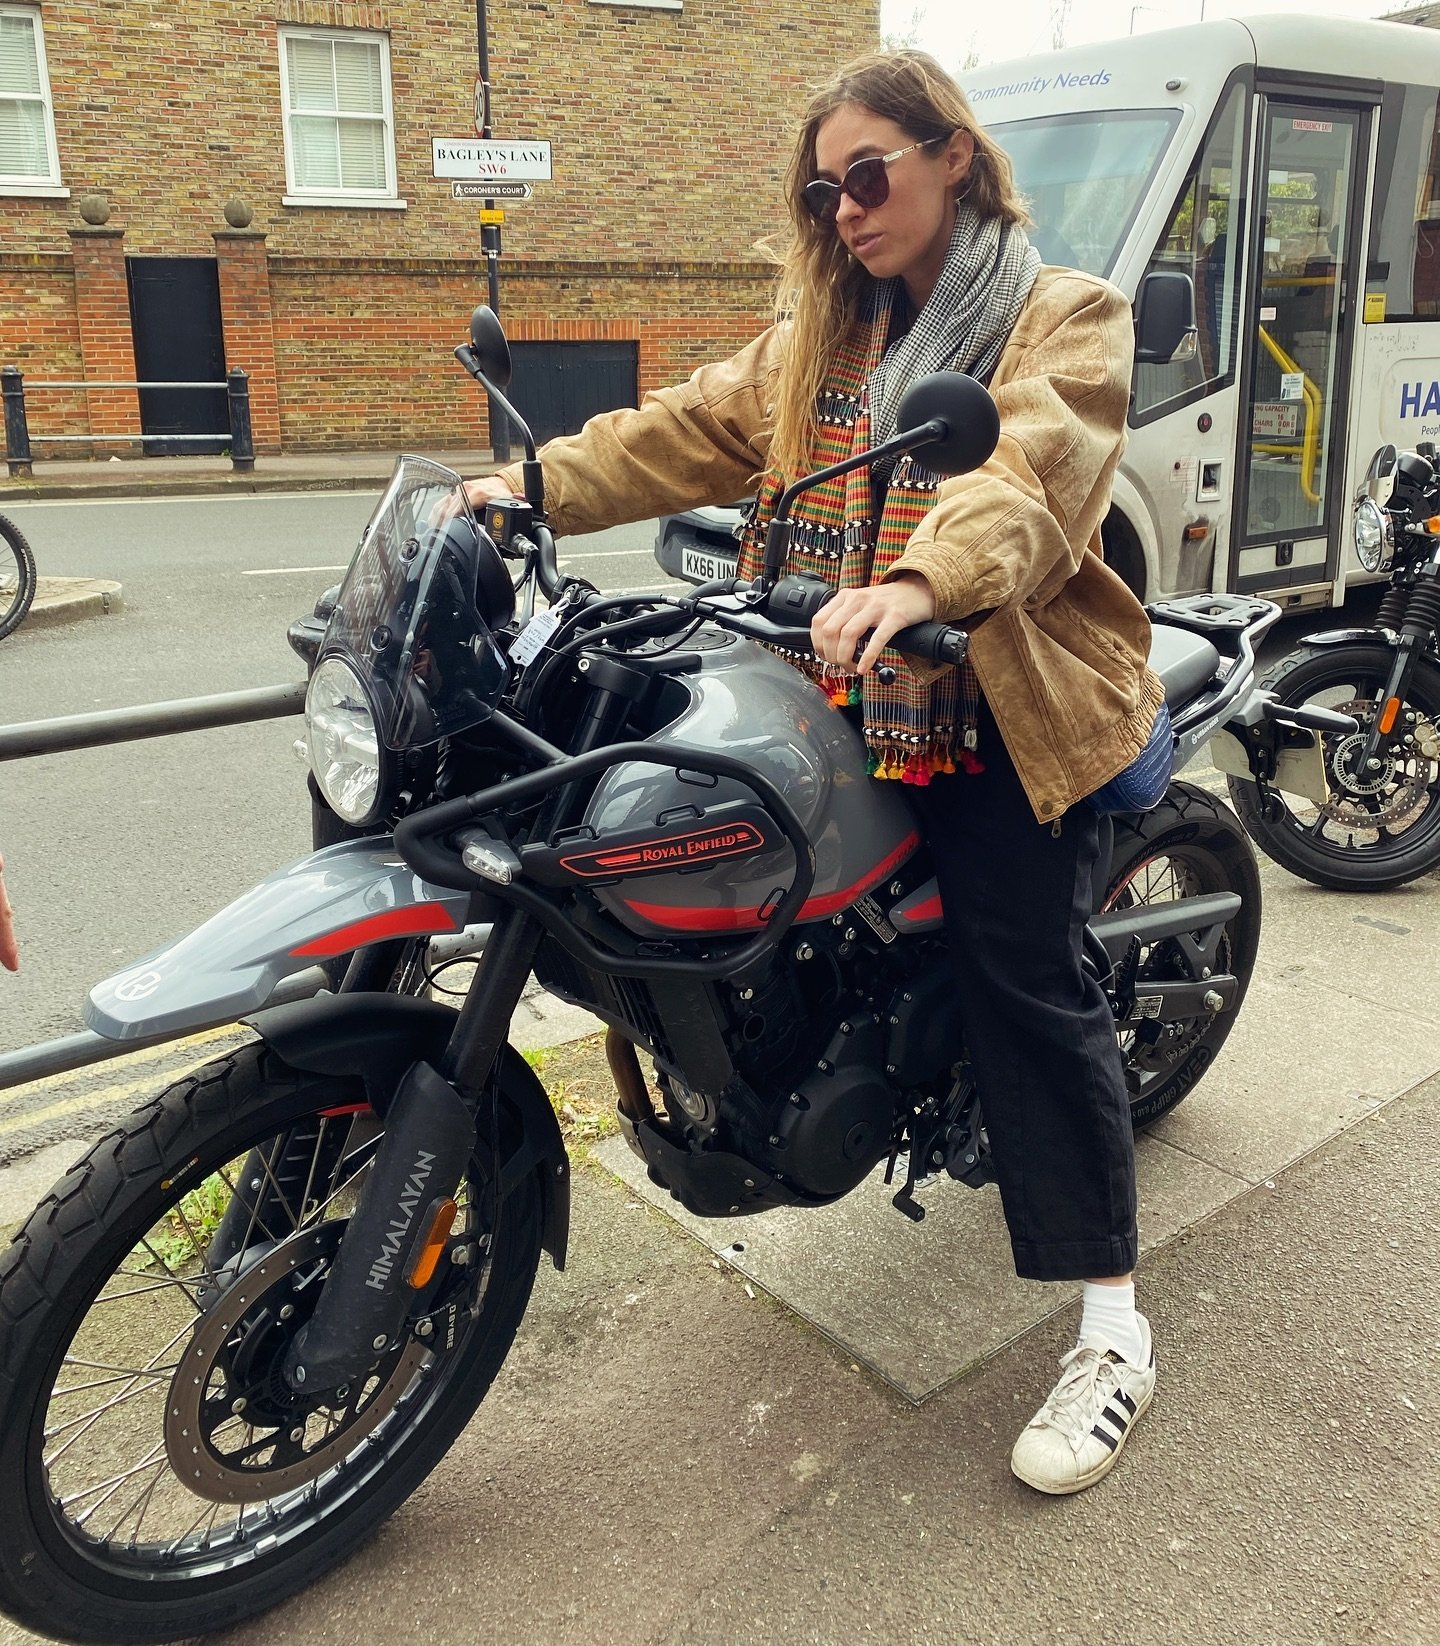 I like things that go vroom 🥹😌
Popped by @urbanriderlondon to test out the new @royalenfield @theroyalenfieldhimalayan @royalenfield.himalayan 🏍️

📸 photo by my legend neighbour and fellow aficionado of film photography, planes, expeditions, scie